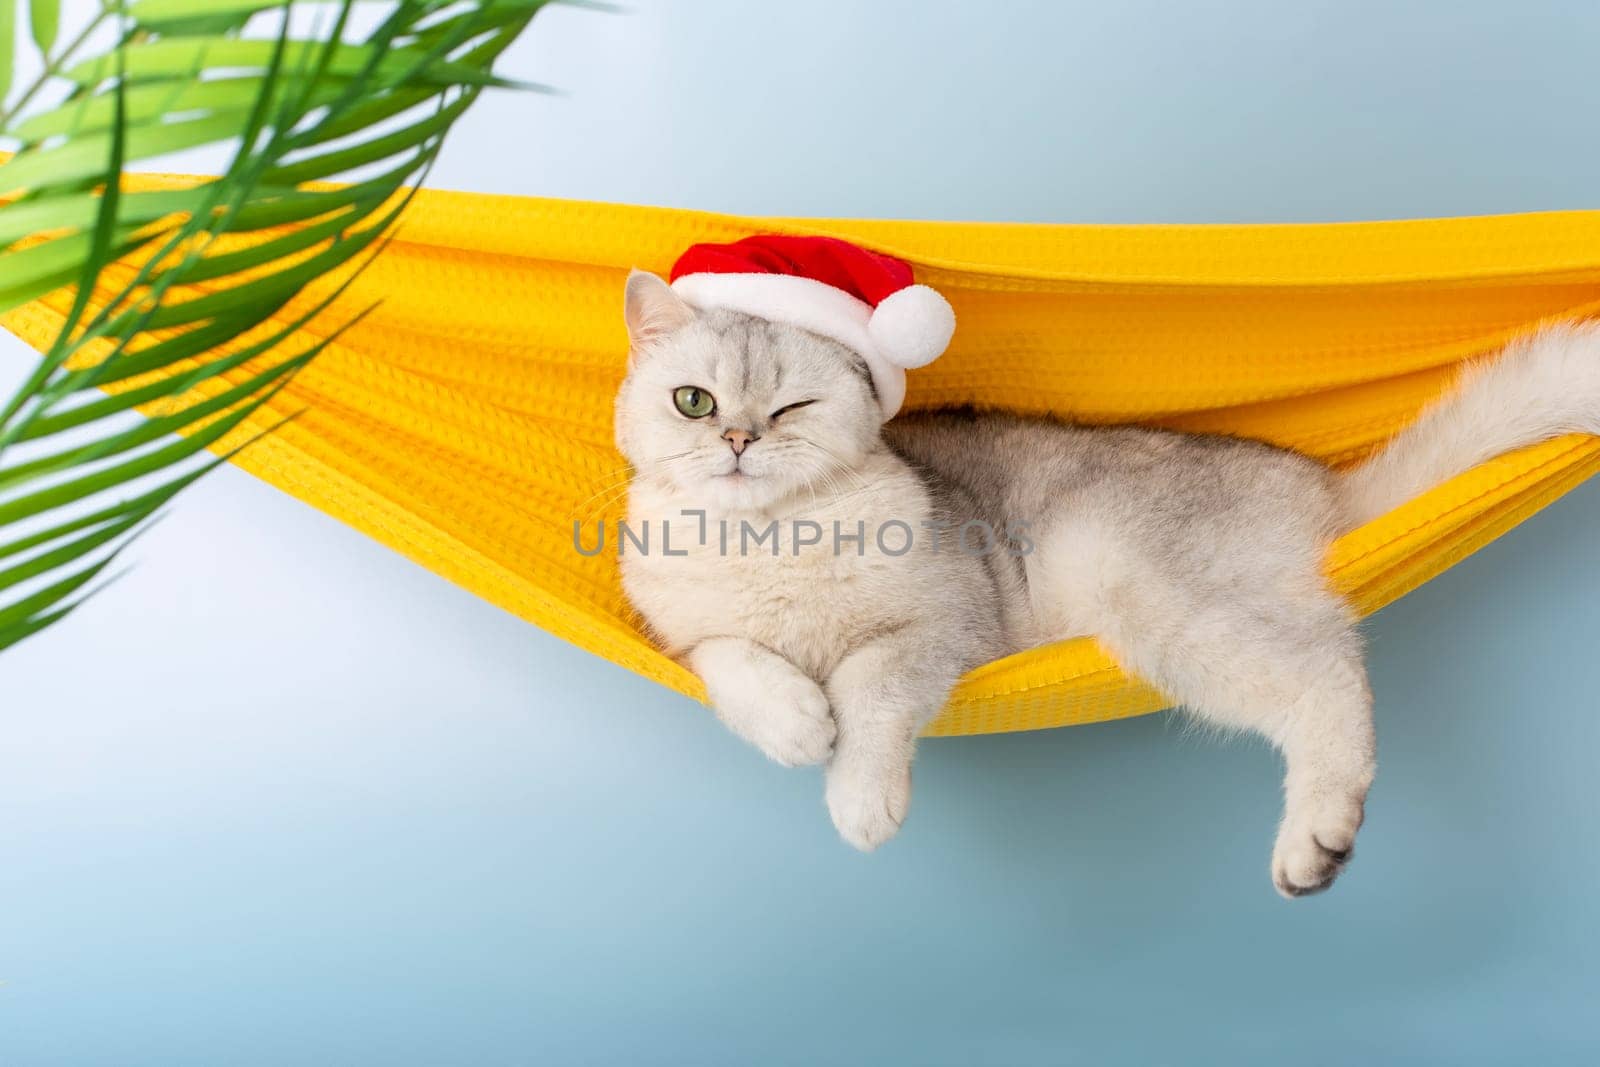 Funny winking white British cat in a red Santa hat, lying in a yellow fabric hammock, isolated on a blue background, under palm leaves. Copy space